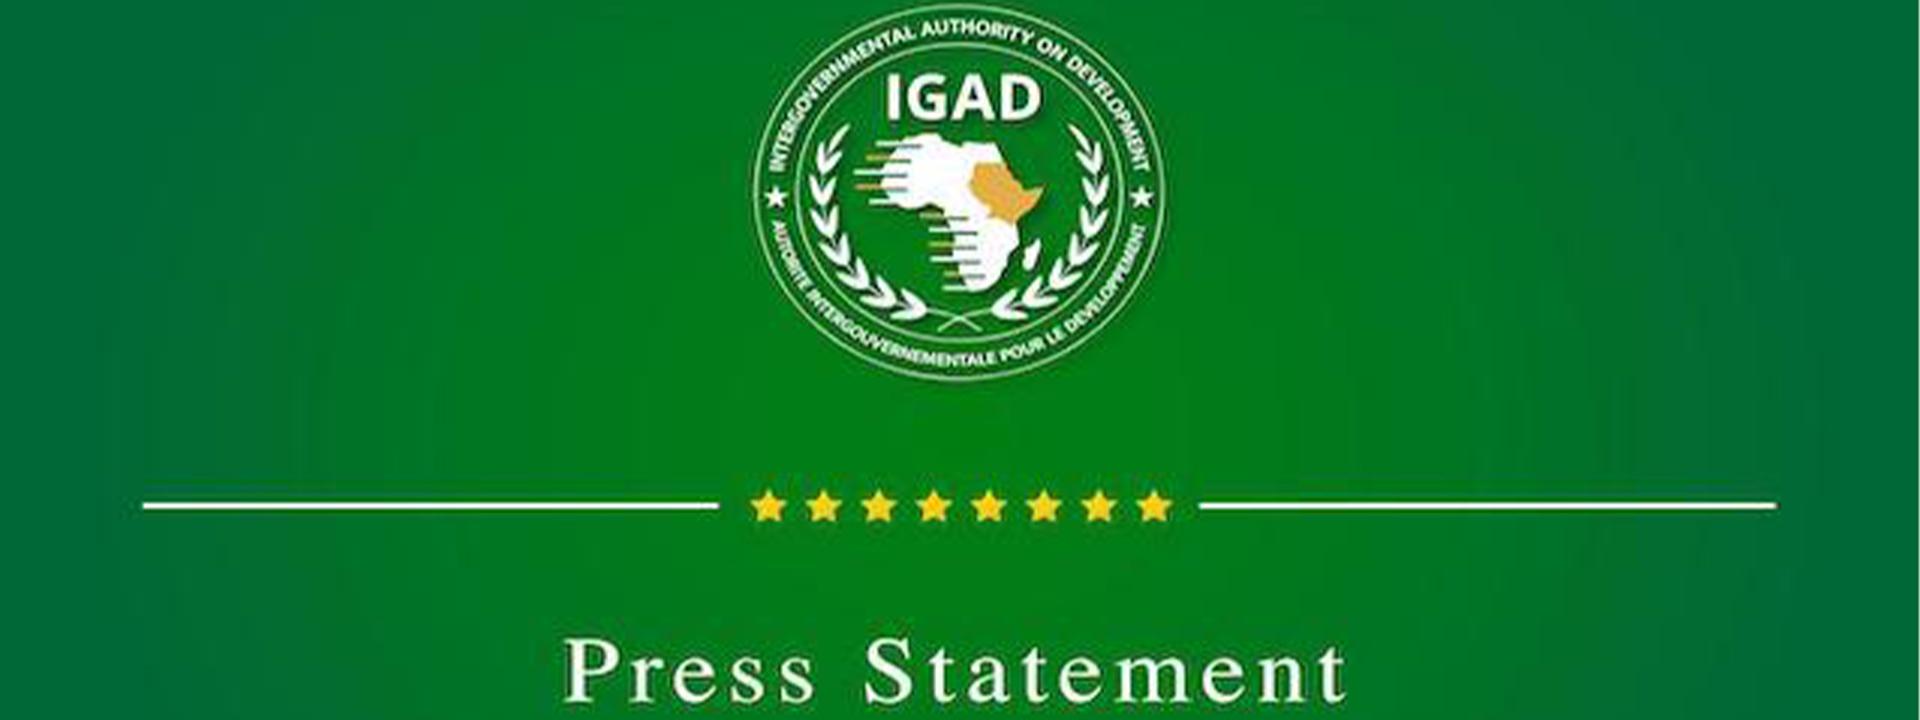 IGAD Committee of Ambassadors and IGAD Red Sea and Gulf of Aden Taskforce Conclude the Validation of the Common IGAD Position and Regional Plan of Action on the Red Sea and Gulf of Aden